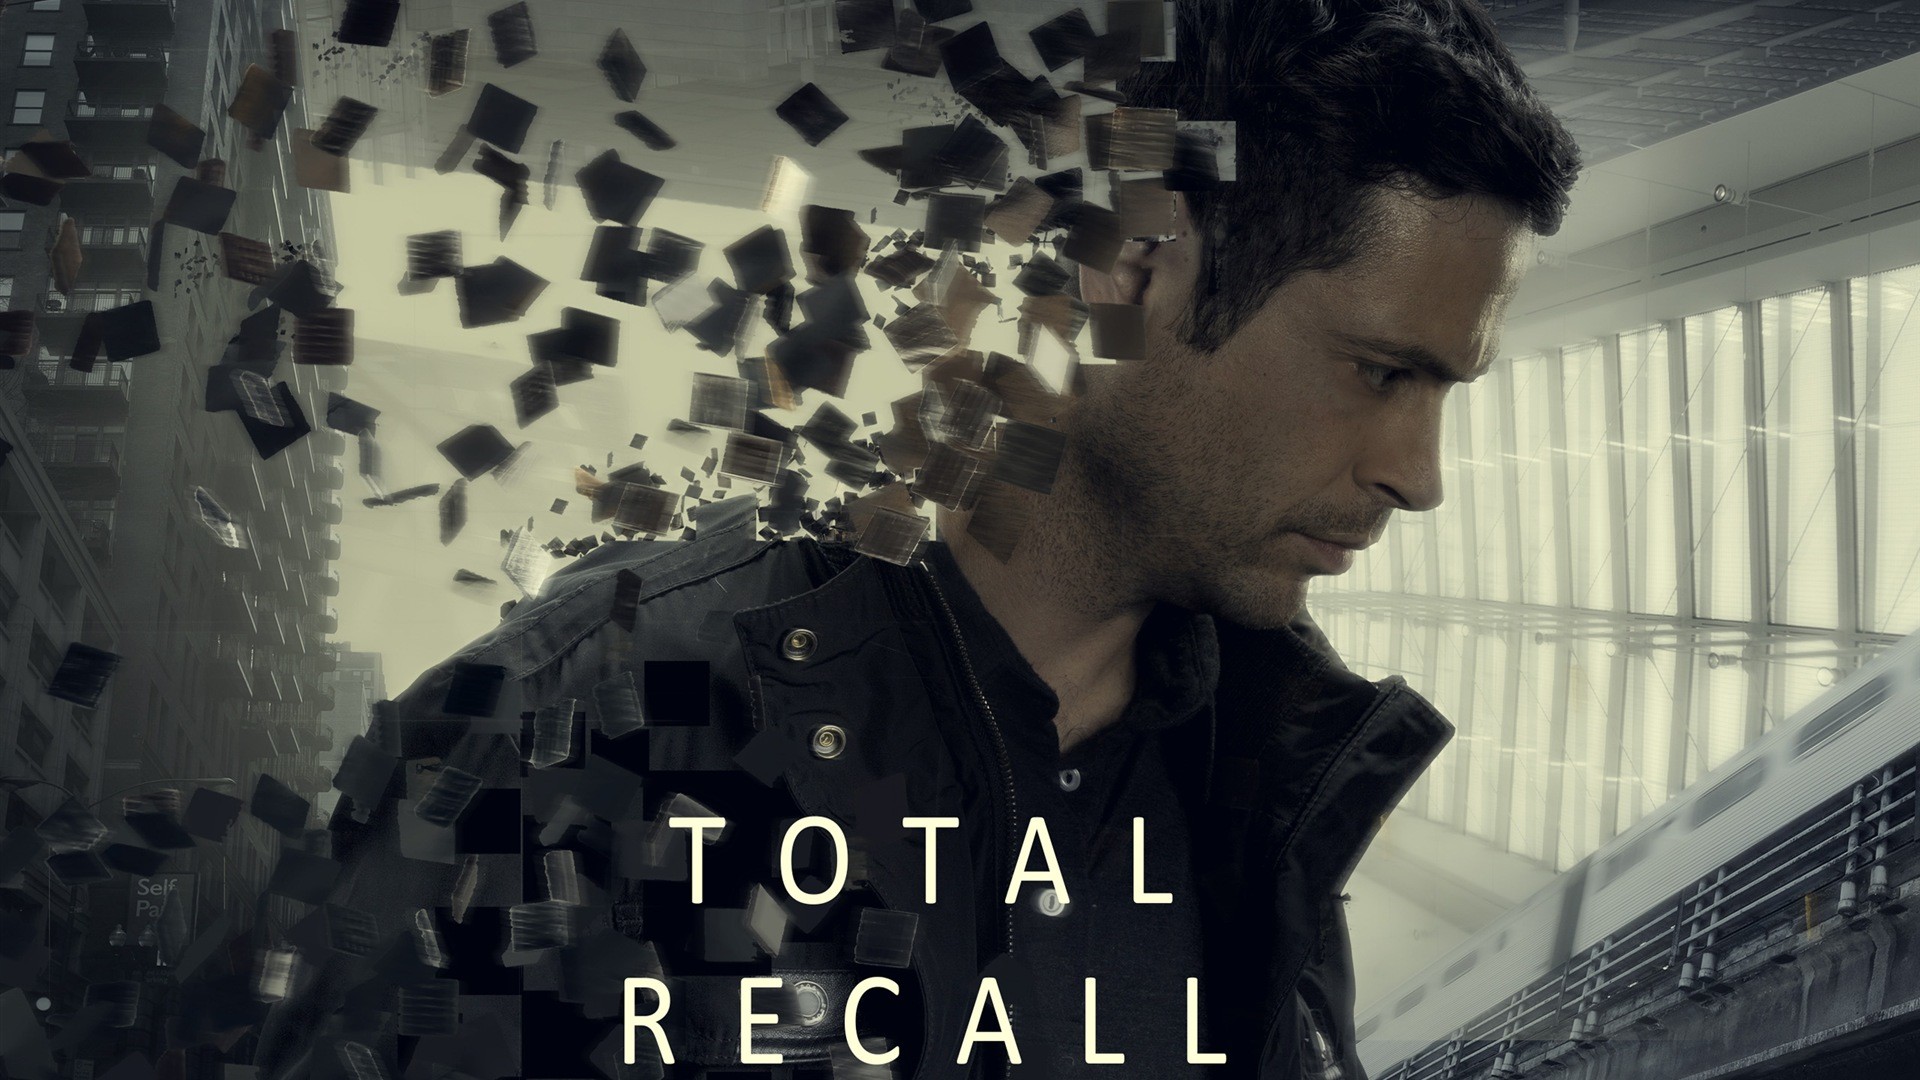 1920x1080 Total Recall 2012 HD wallpapers #15 - .